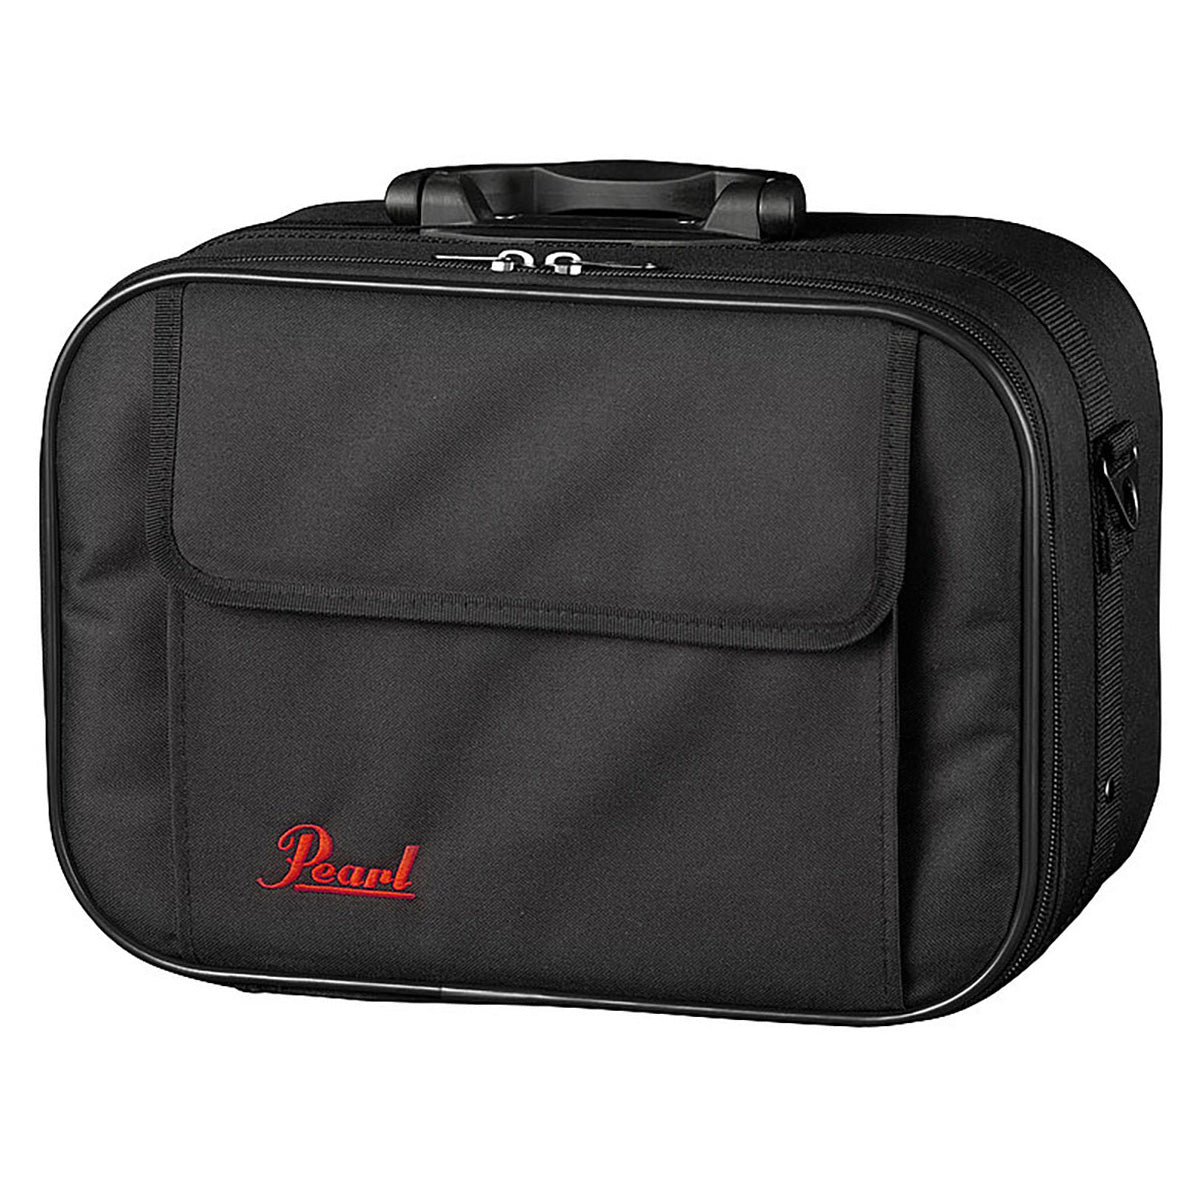 Carrying case for the Pearl P2050C Eliminator: Redline Single Bass Drum Pedal